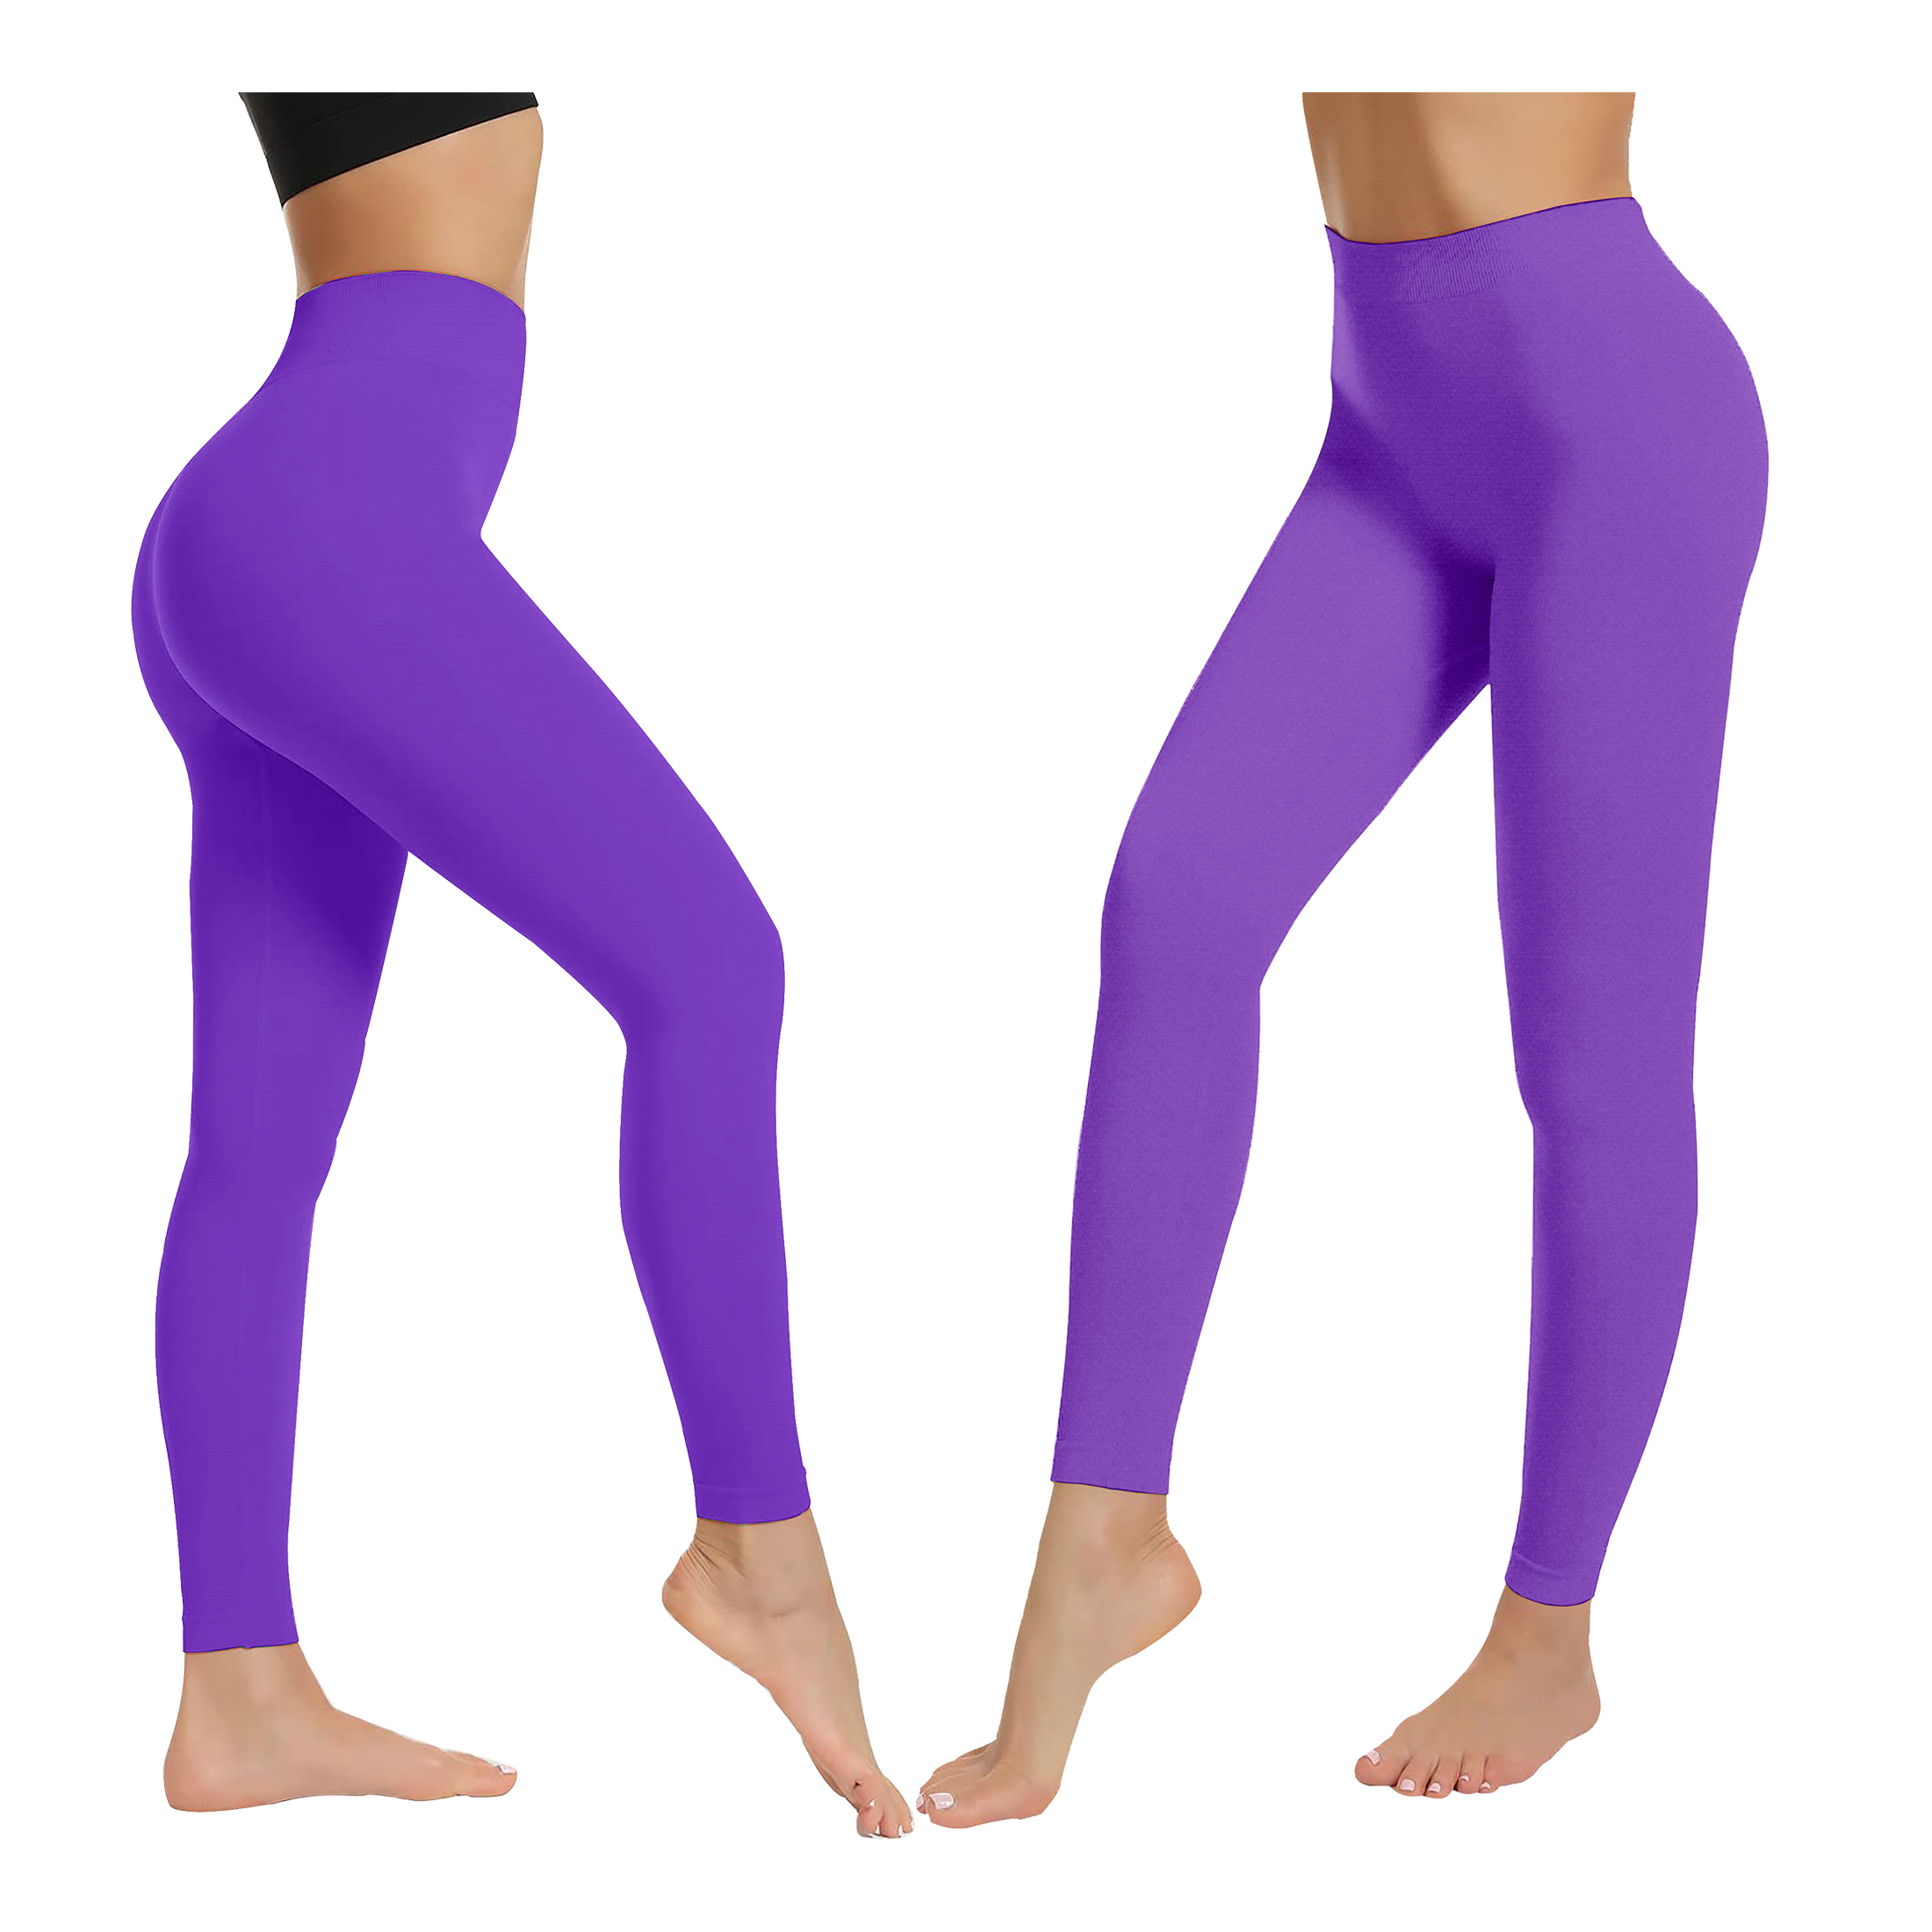 3-Pack: Women's High-Waist Ultra-Soft Solid Fitness Stretchy Yoga Leggings Pants - S